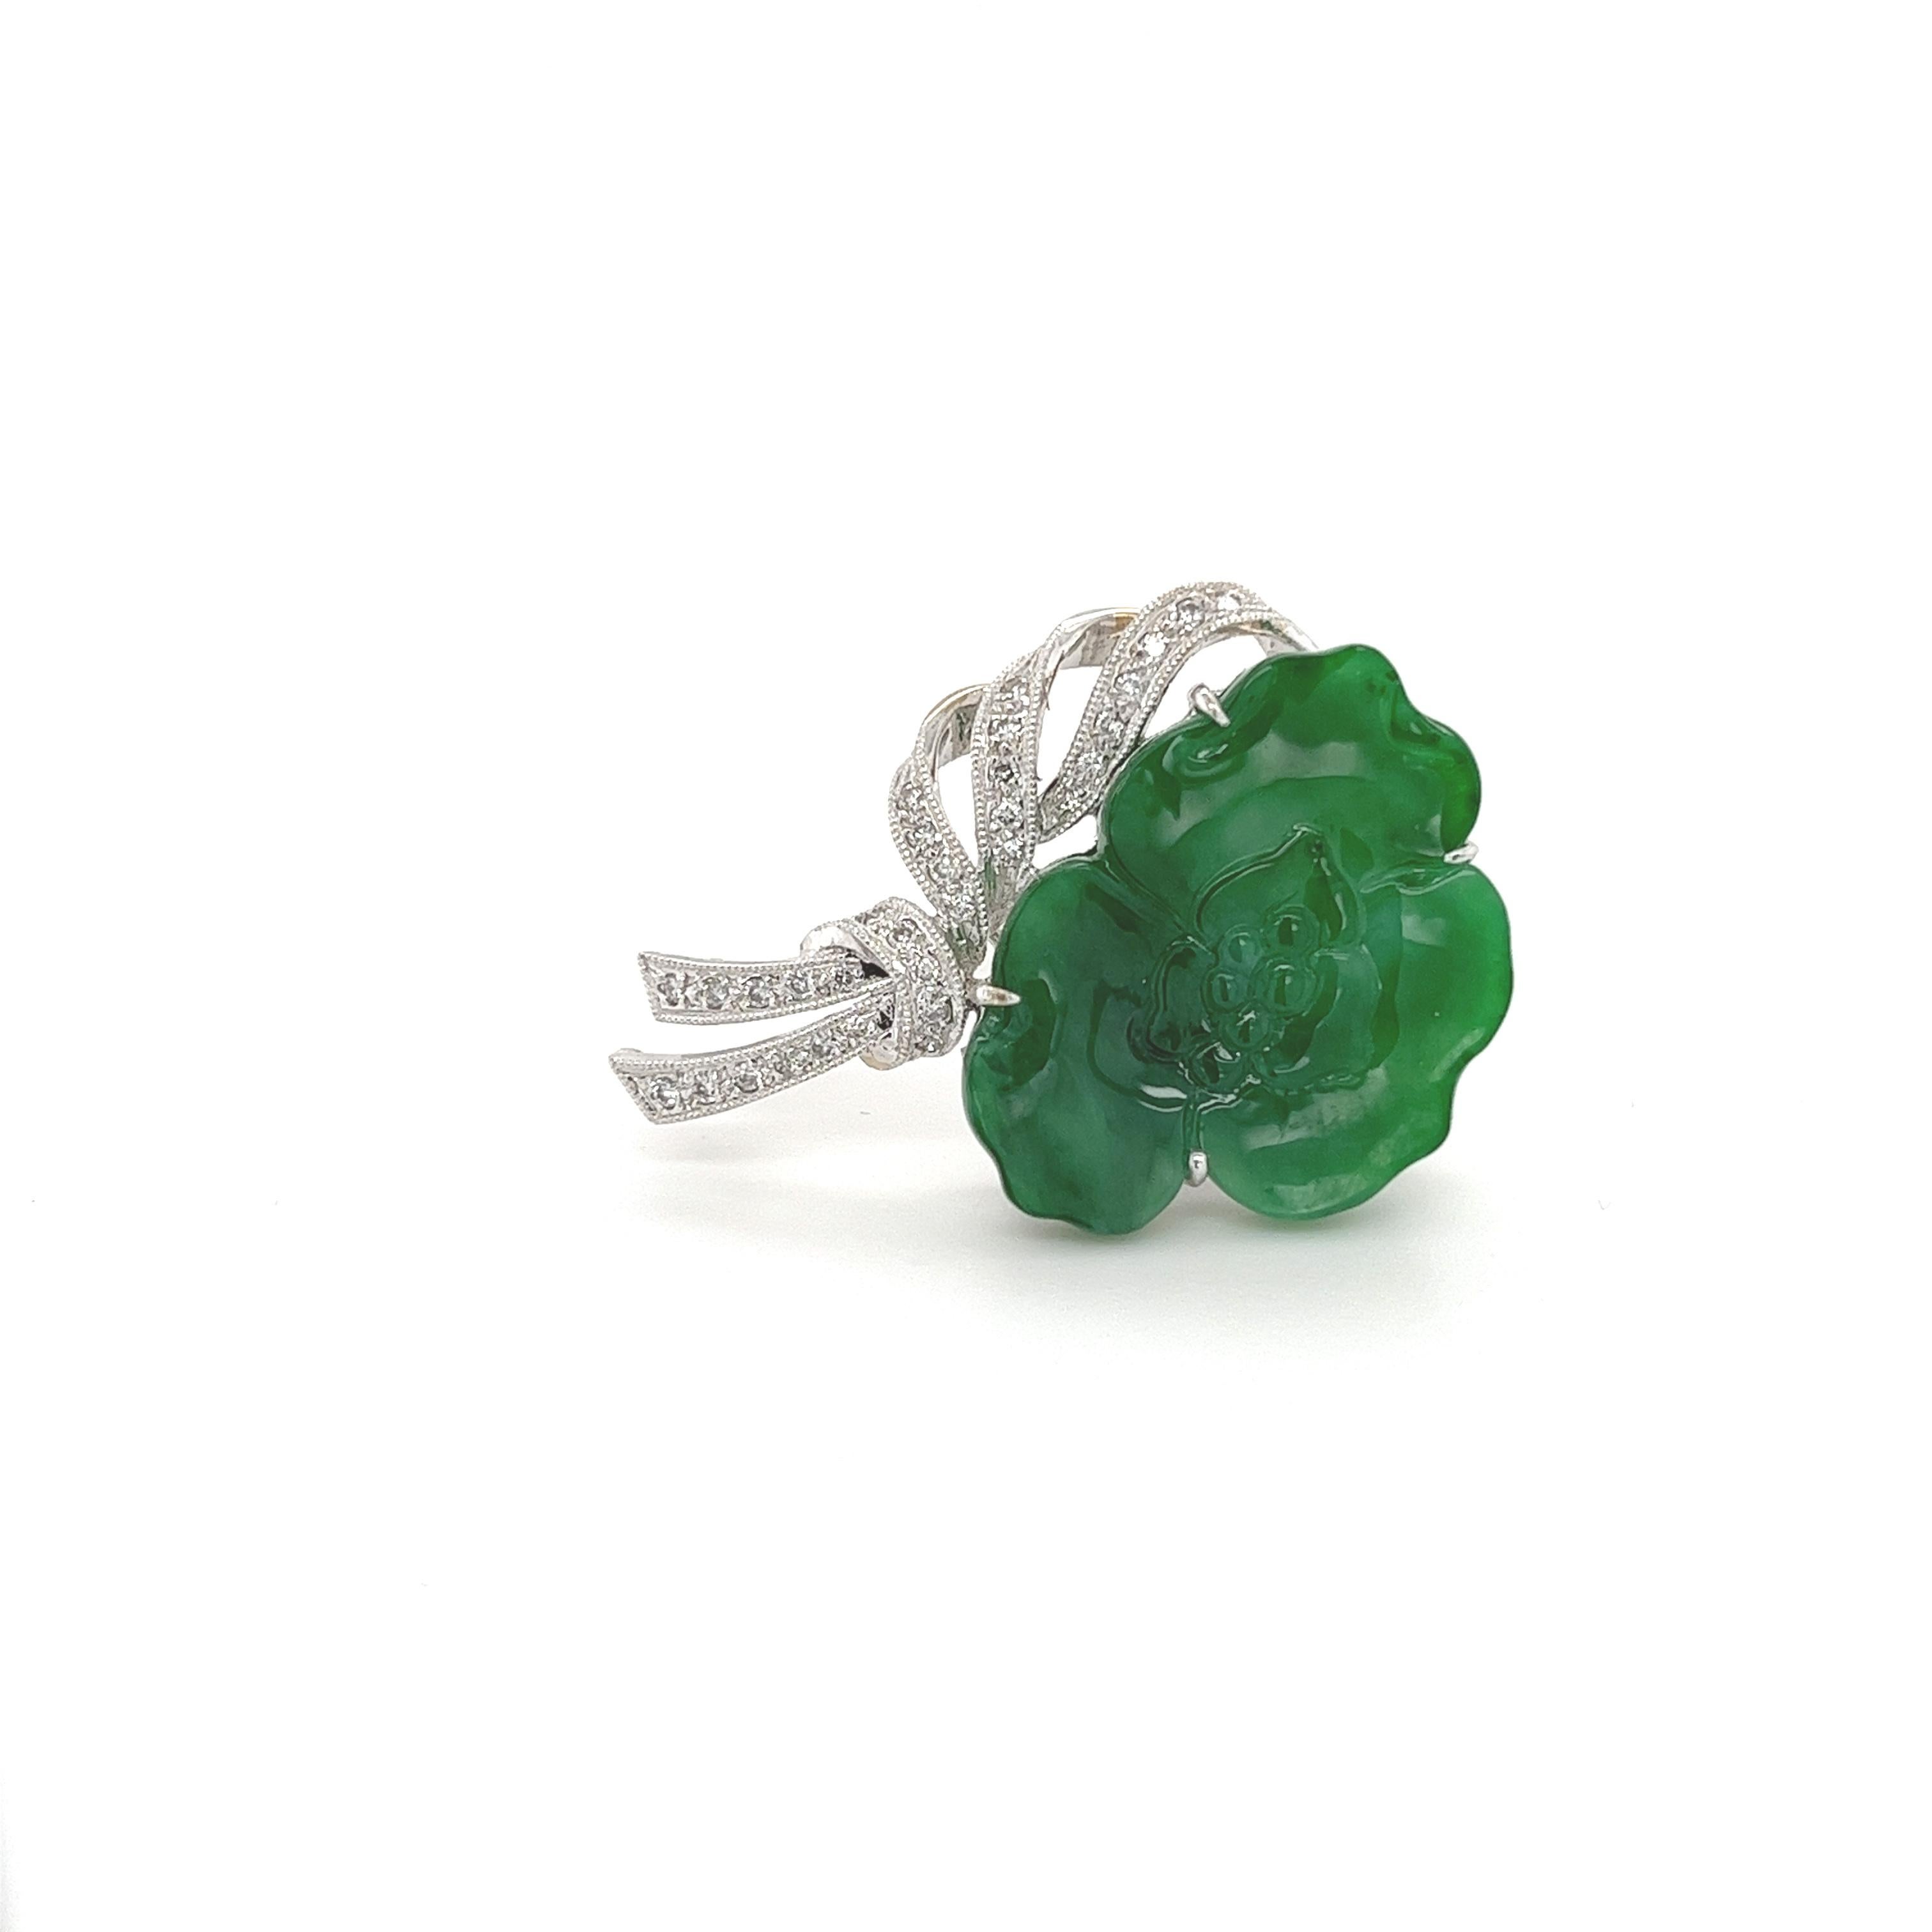 Untreated Burmese Jadeite Jade in a gorgeous floral grapevine motif design. Paired with 33 round brilliant cut diamonds in a gorgeous ribbon design. All set in 18 karat smooth white gold. This brooch has a sturdy closure with a safety clasp for